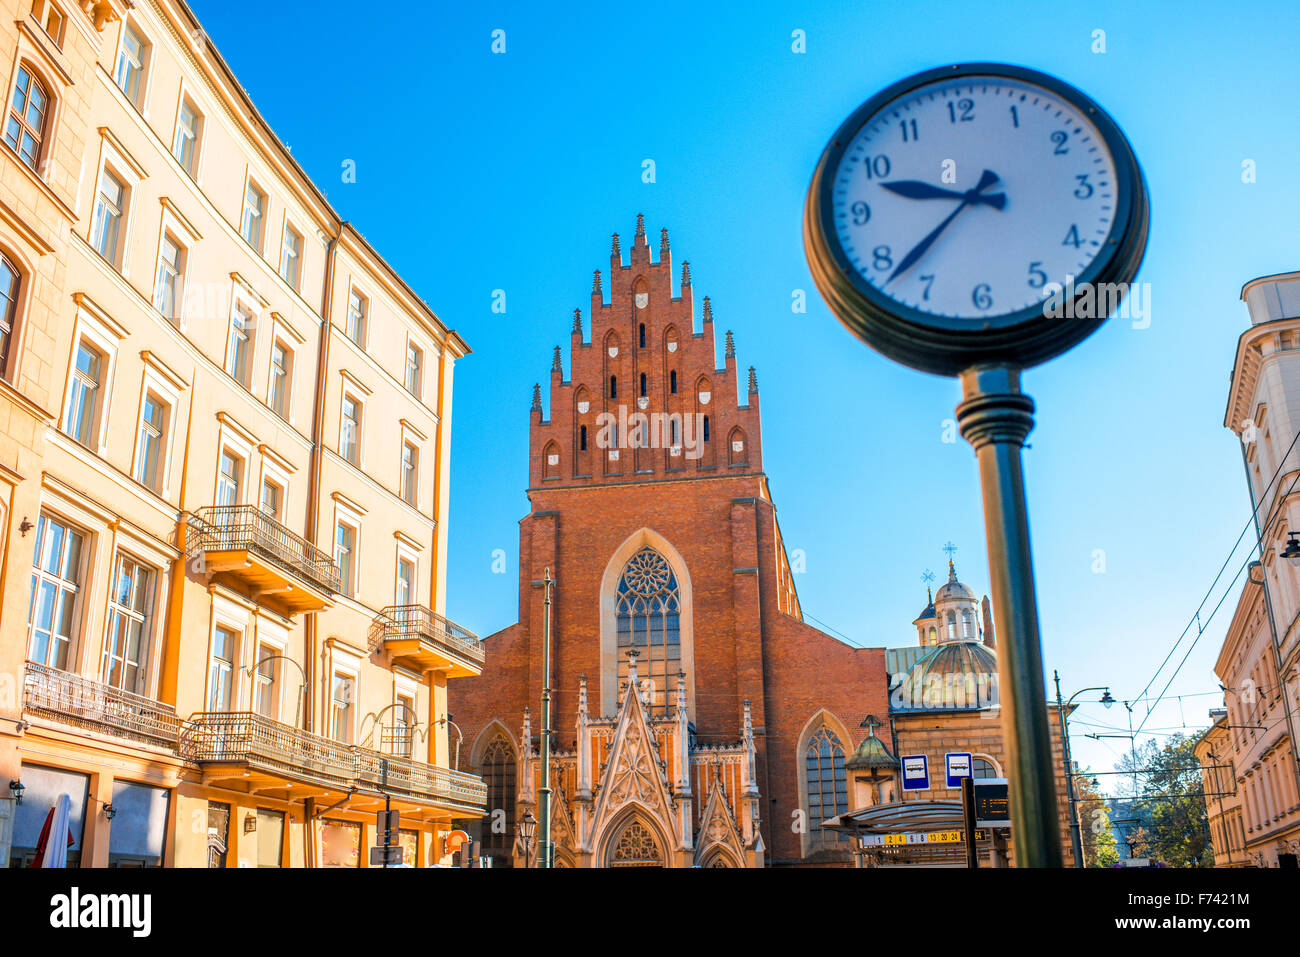 View on Holy Trinity church with city clock in Krakow town Stock Photo